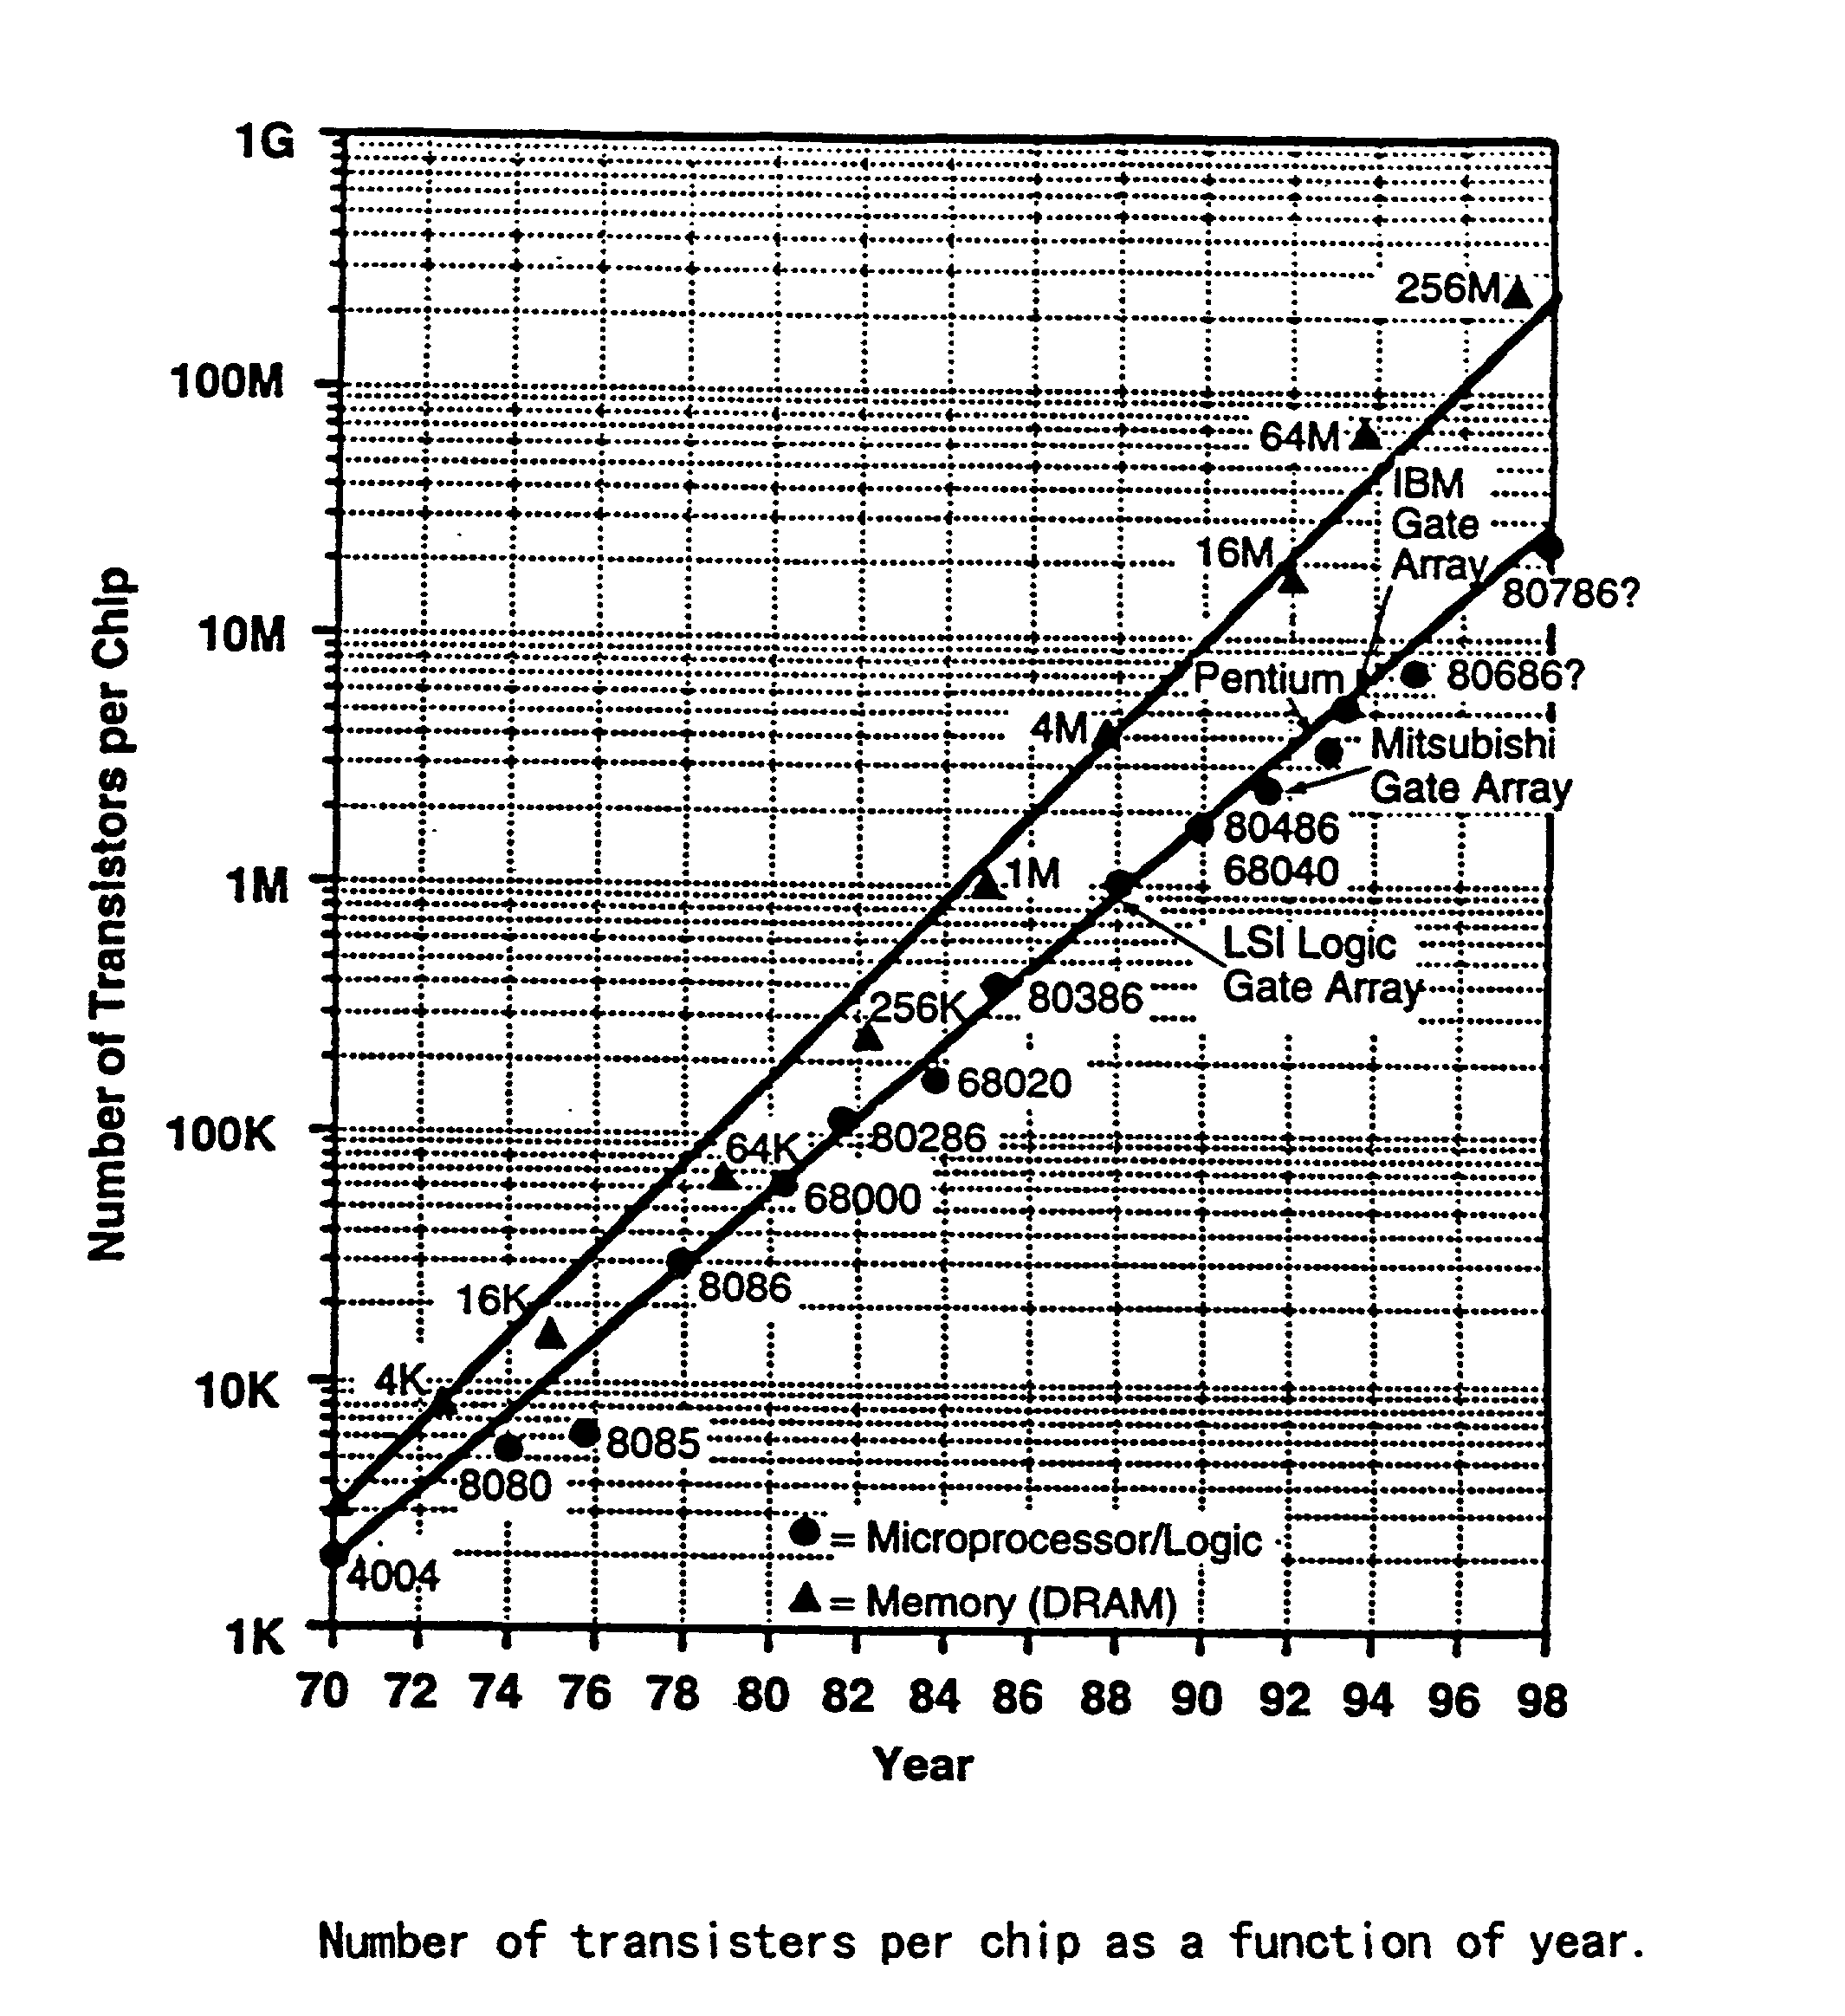 Method and apparatus for simulating manufacturing, electrical and physical characteristics of a semiconductor device